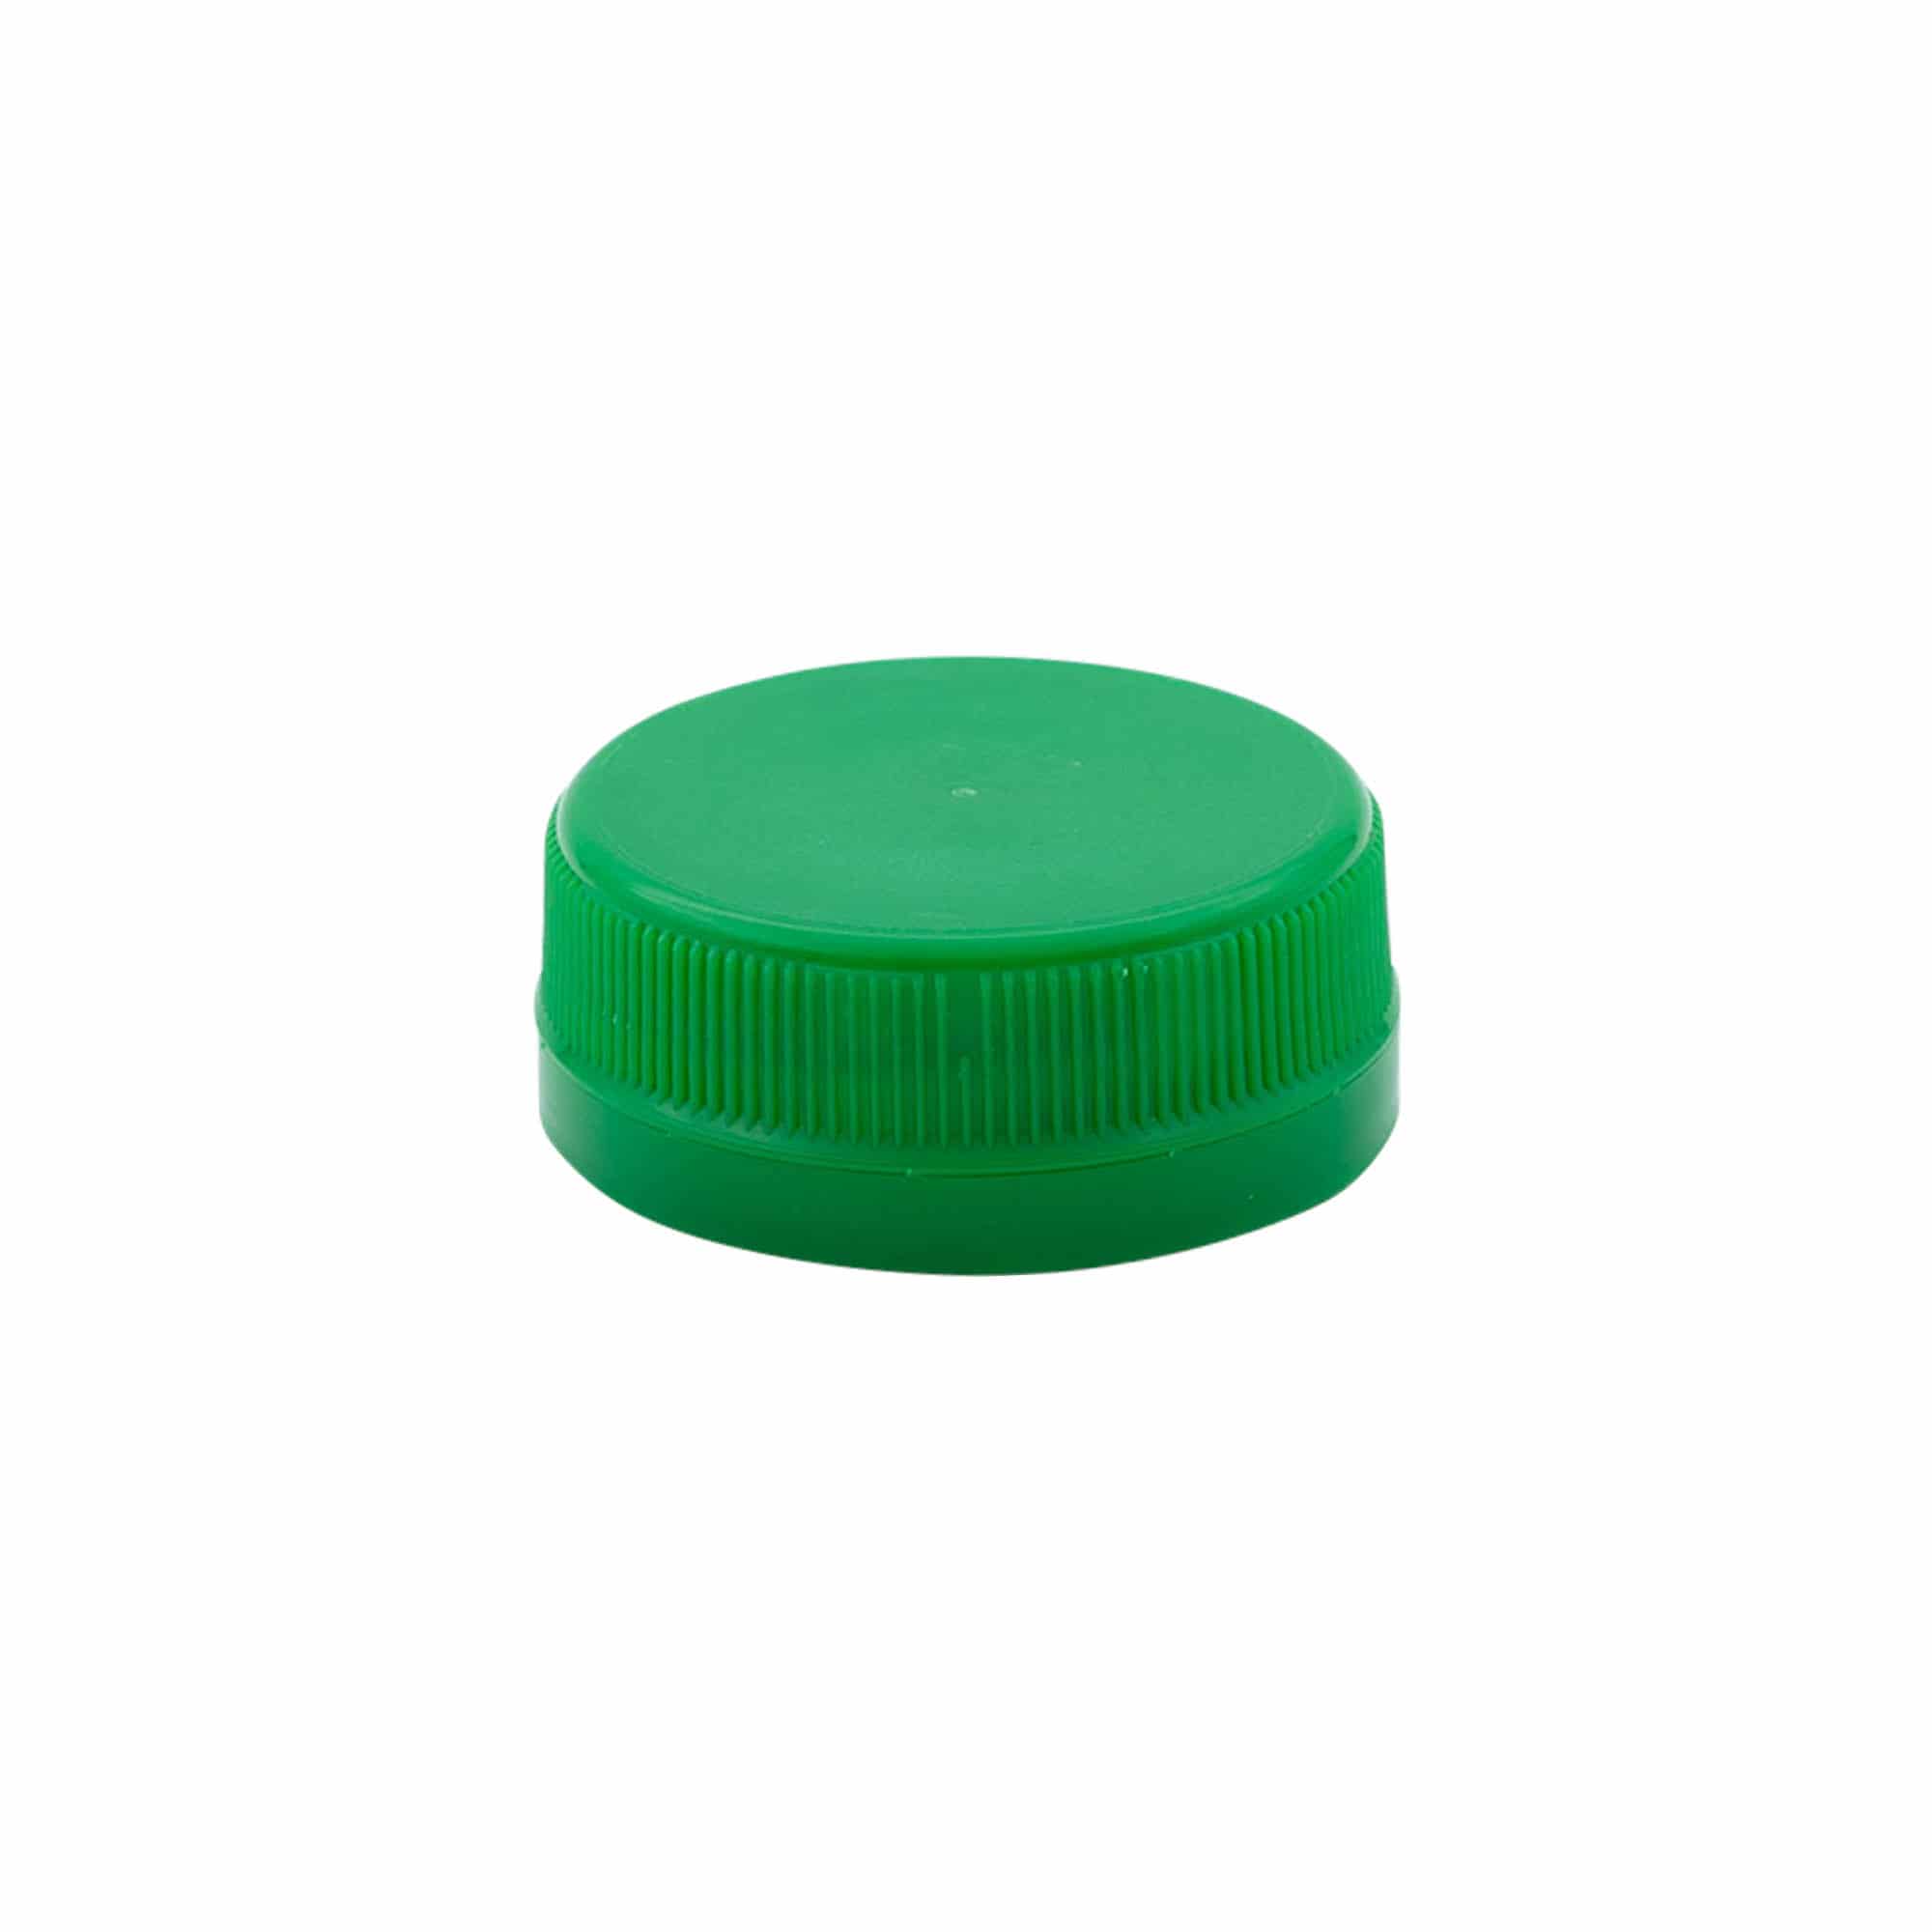 Screw cap for two start thread, PE plastic, green, for opening: PET 38 mm